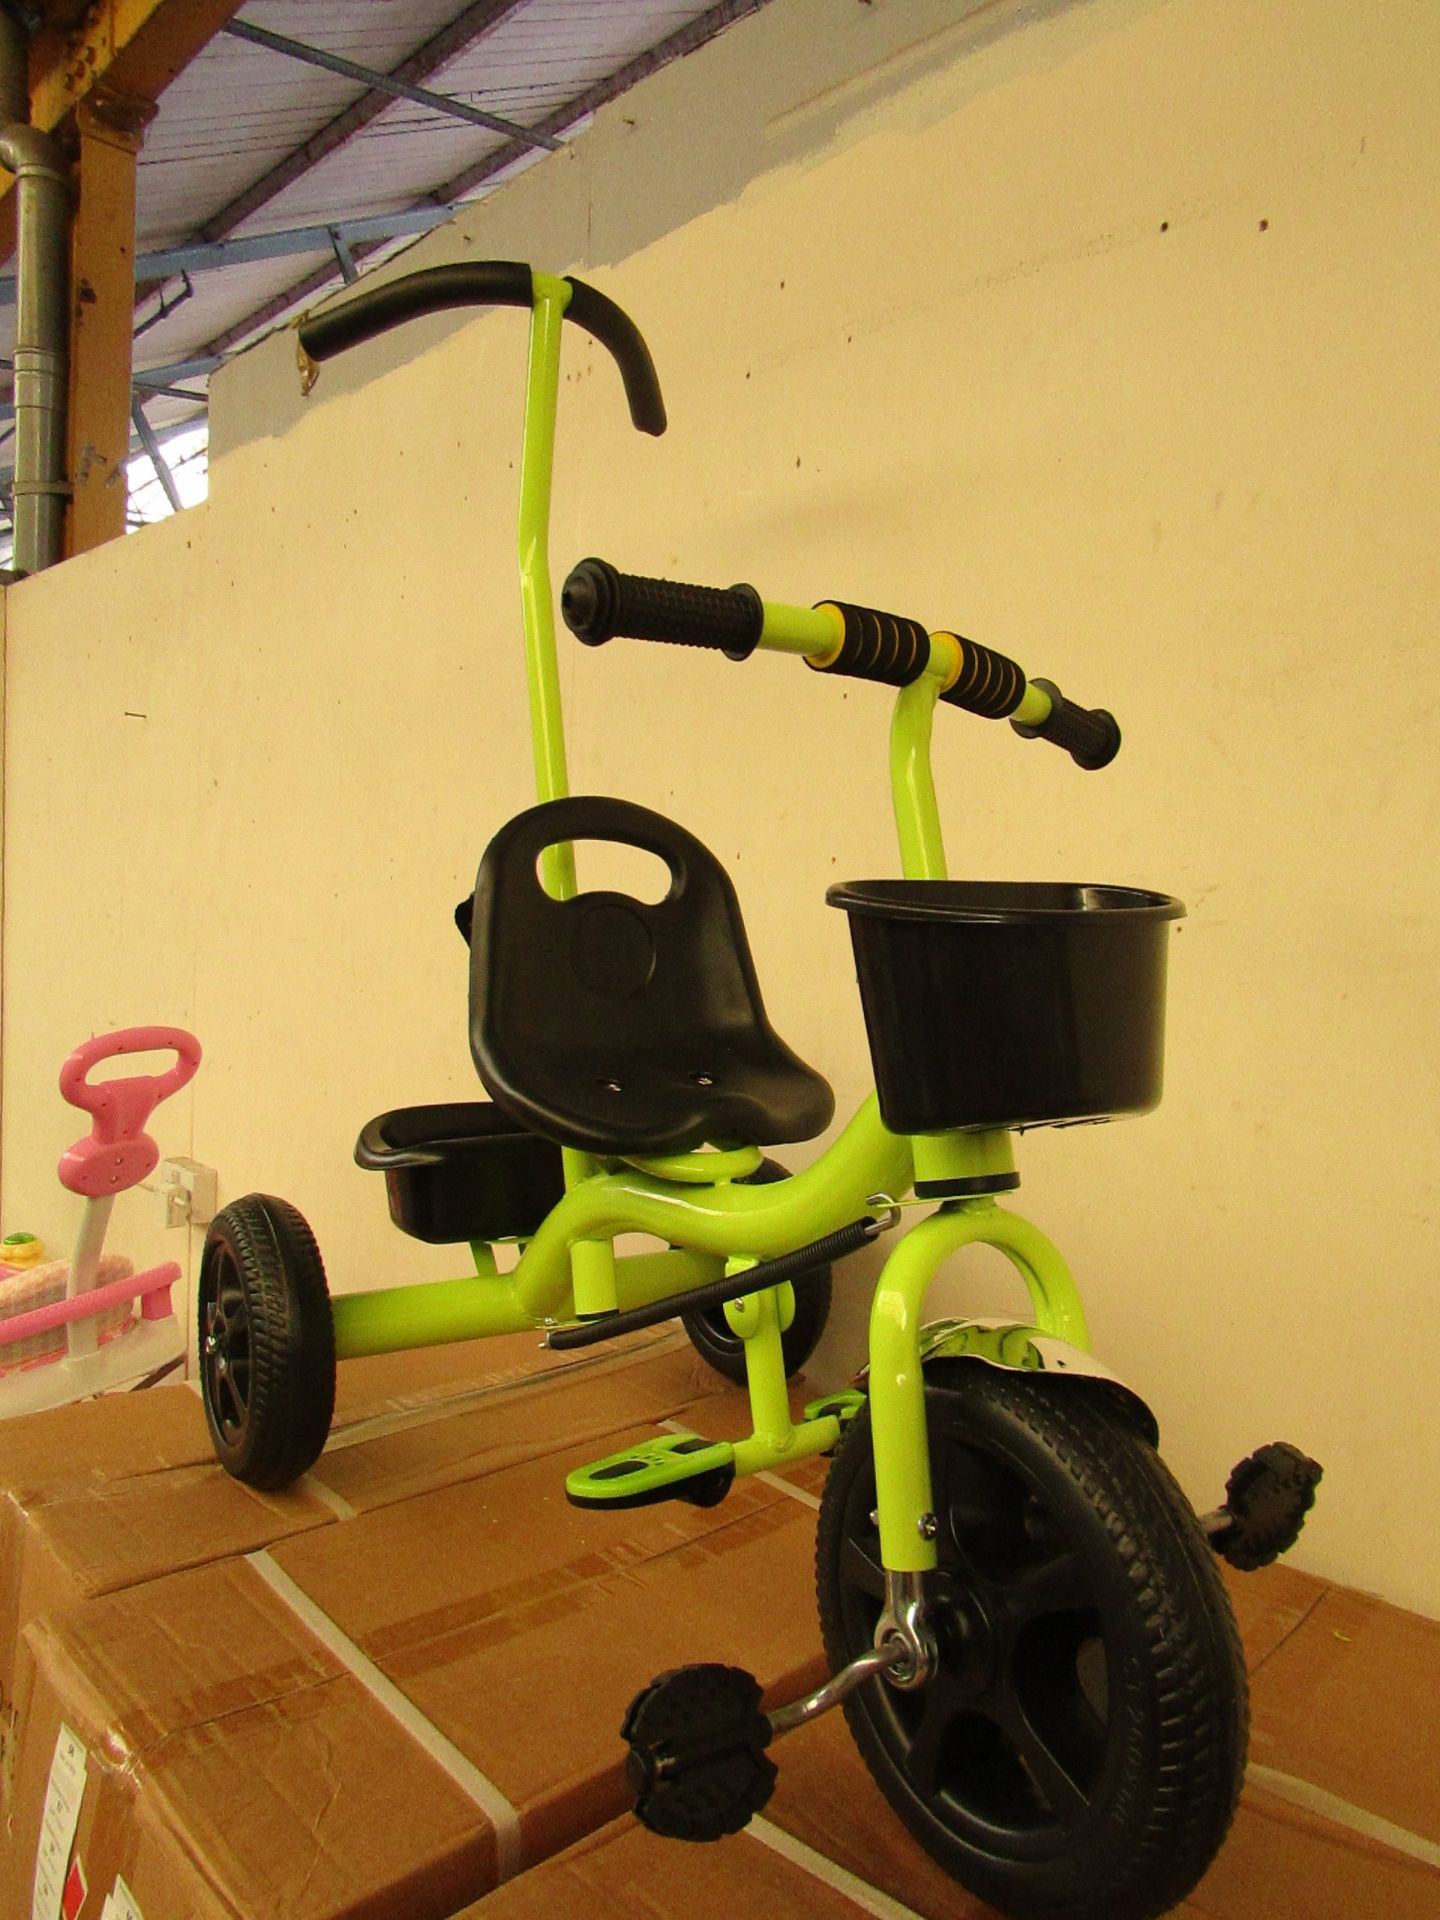 Green colour tricycle with parental control handle. New and boxed.